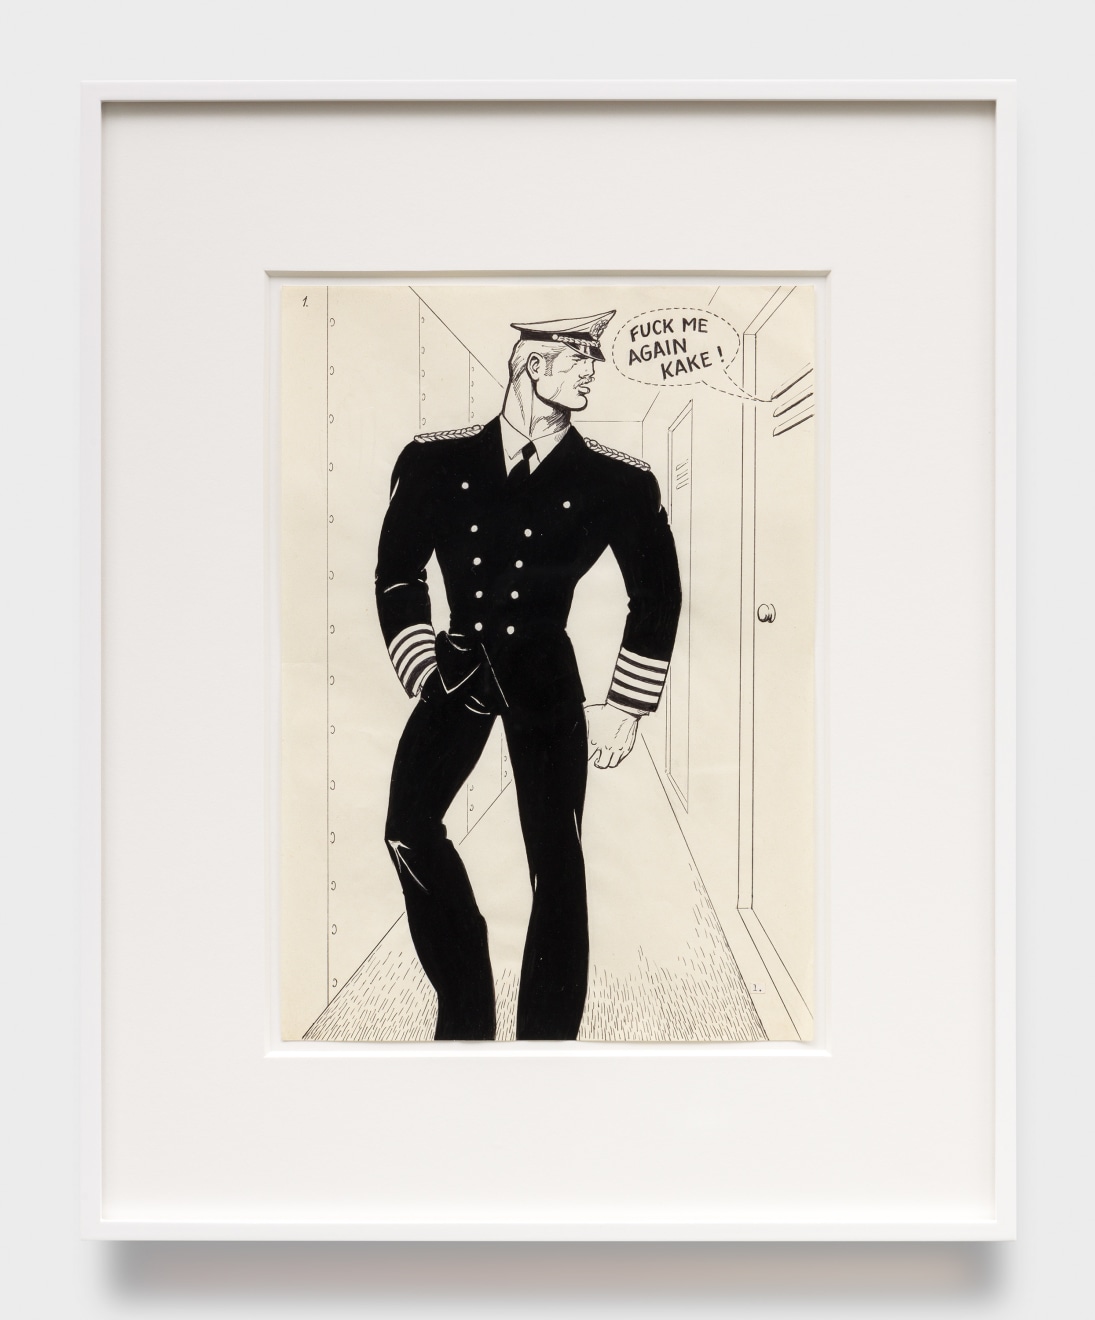 Tom of Finland, Untitled (from Kake vol. 19 - &quot;Curious Captain&quot;), 1975